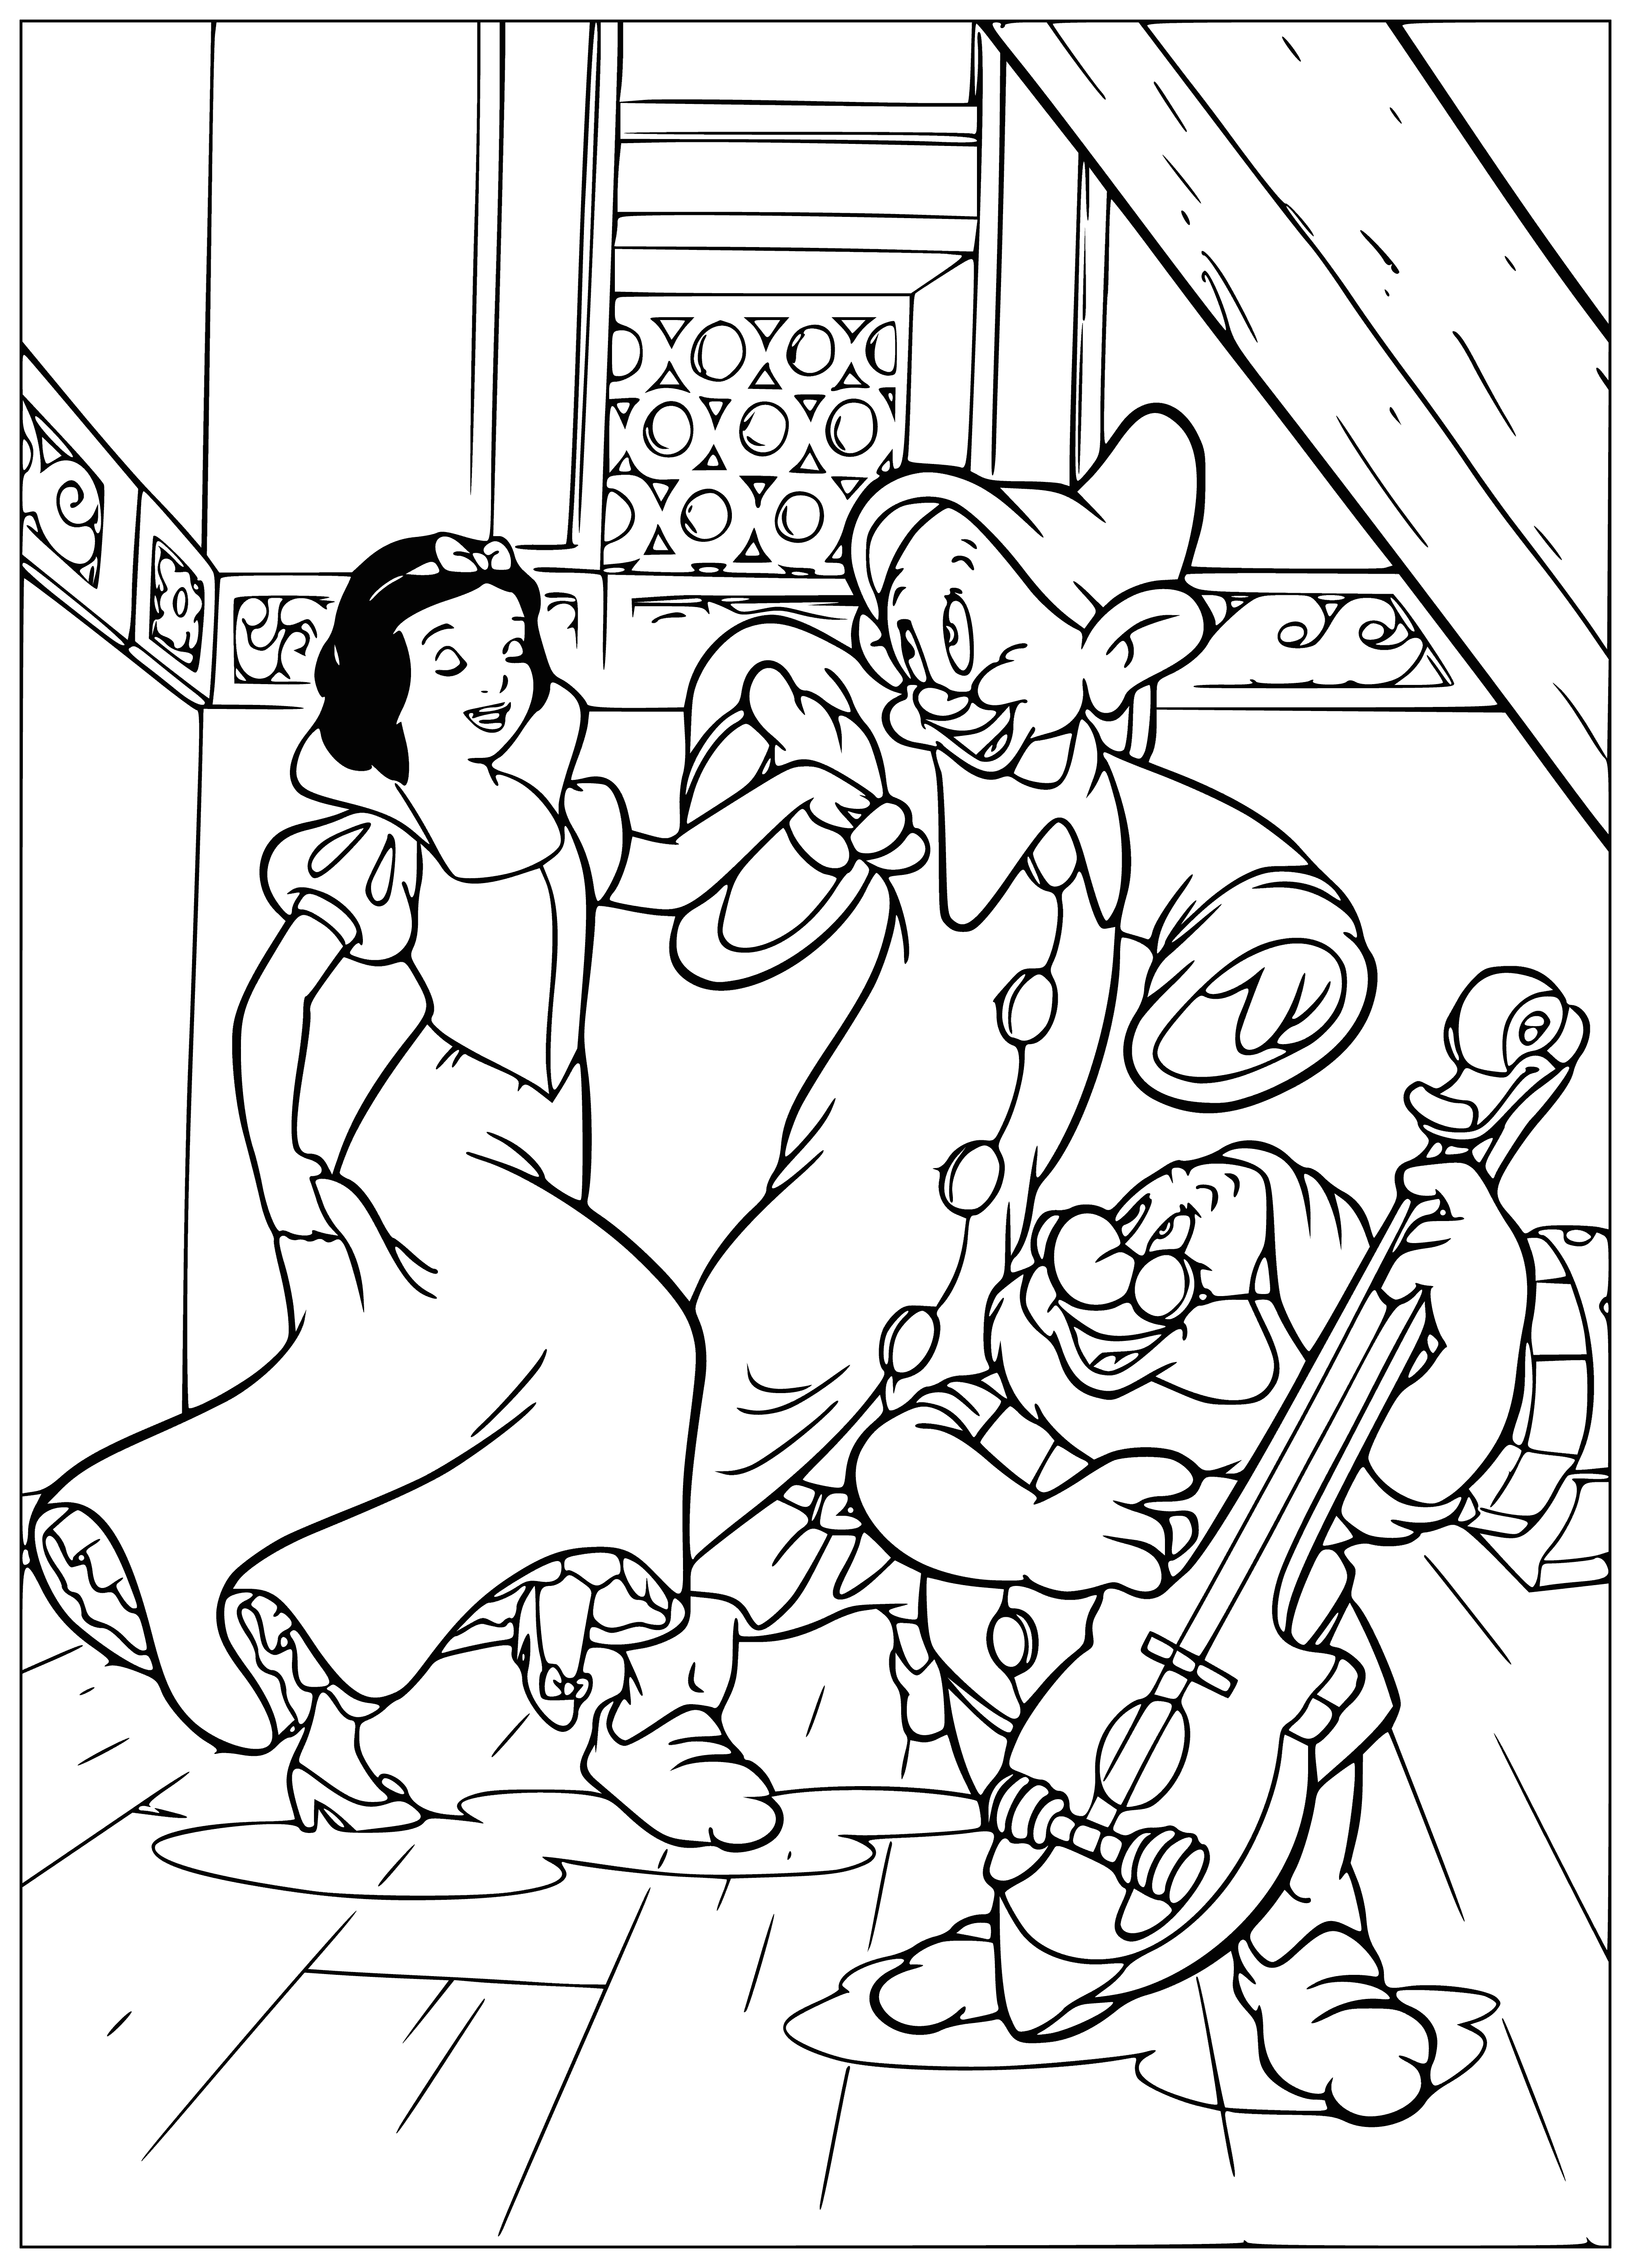 Snow White and the Dwarfs coloring page